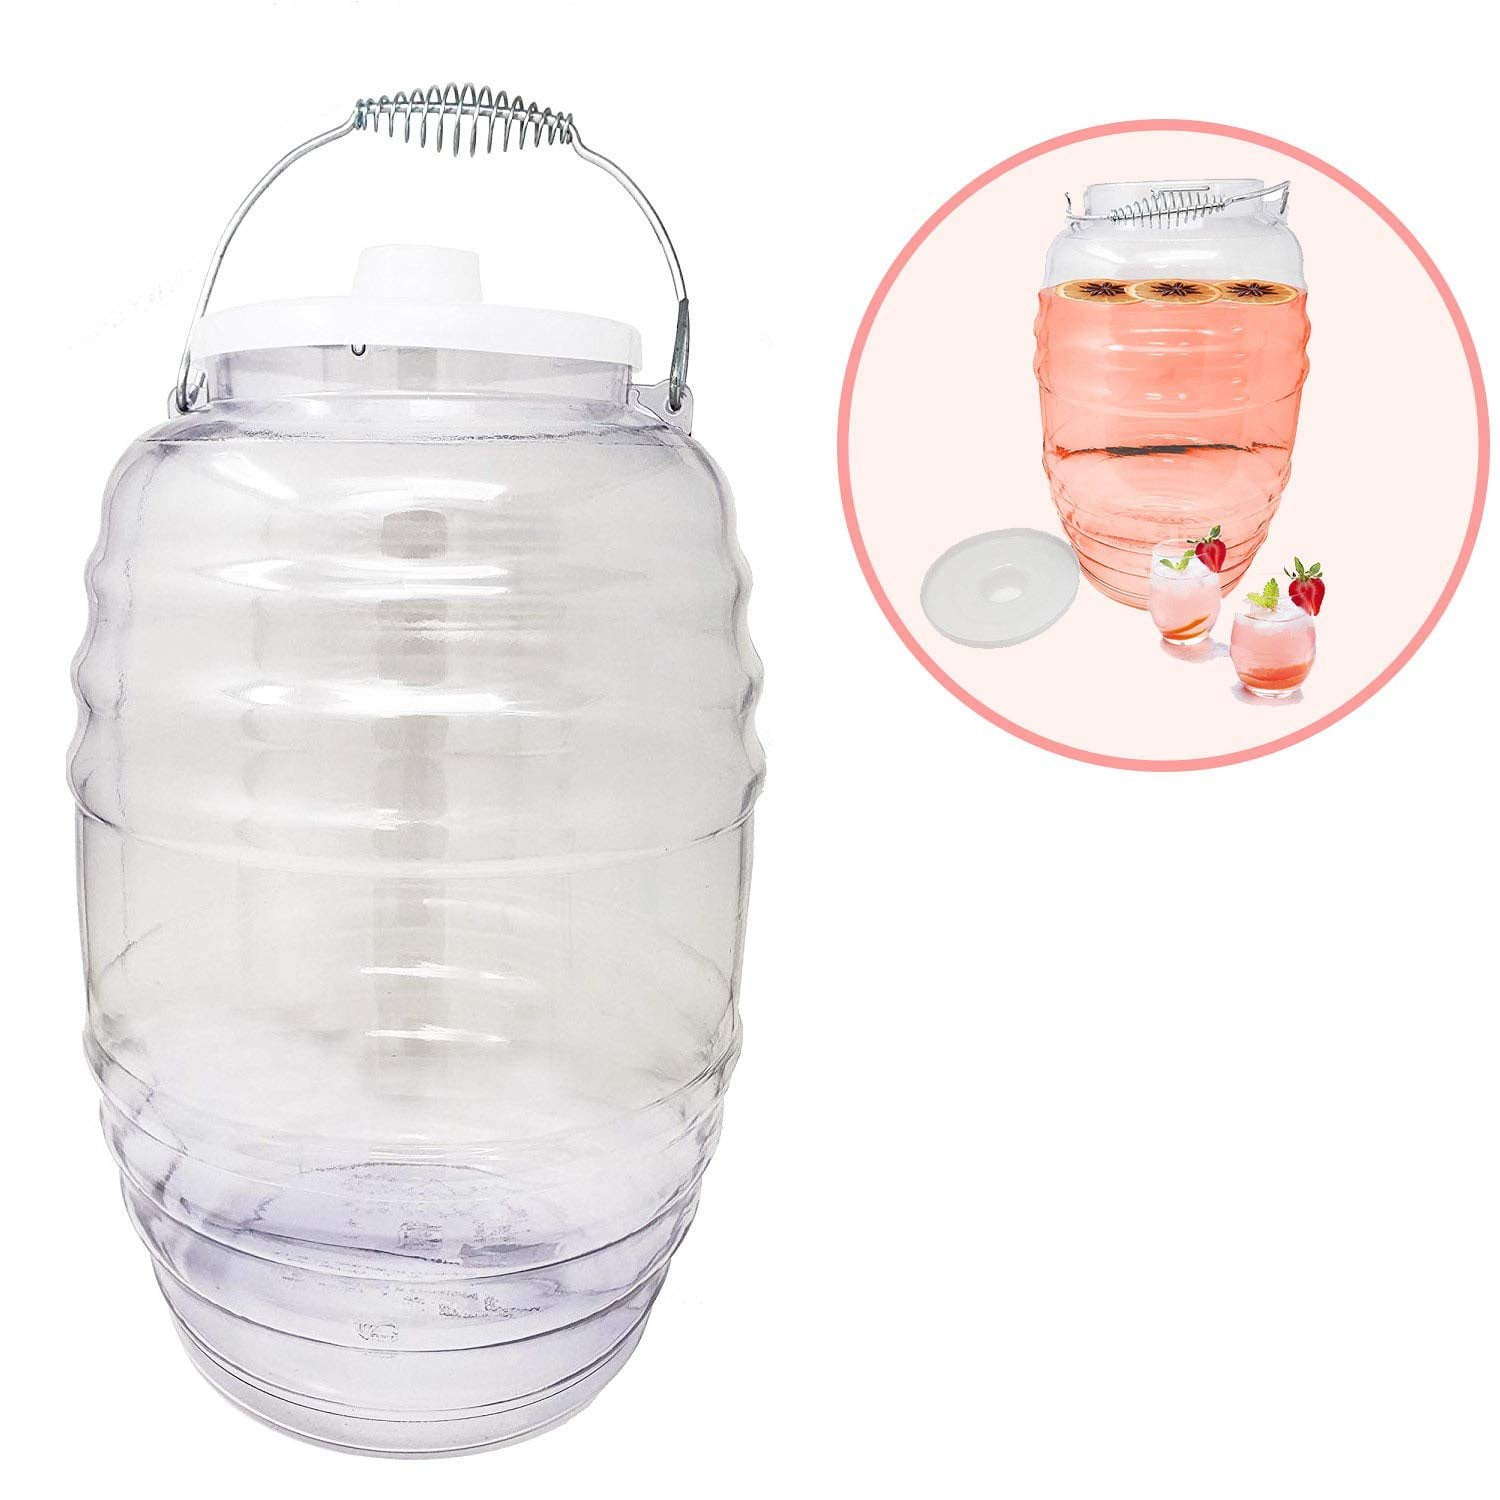 2 Pack 5 Gallon Jug with Lid - Aguas Frescas Vitrolero Water Container -  Napkins included for Party - Large Beverage Dispenser Ideal for Agua fresca